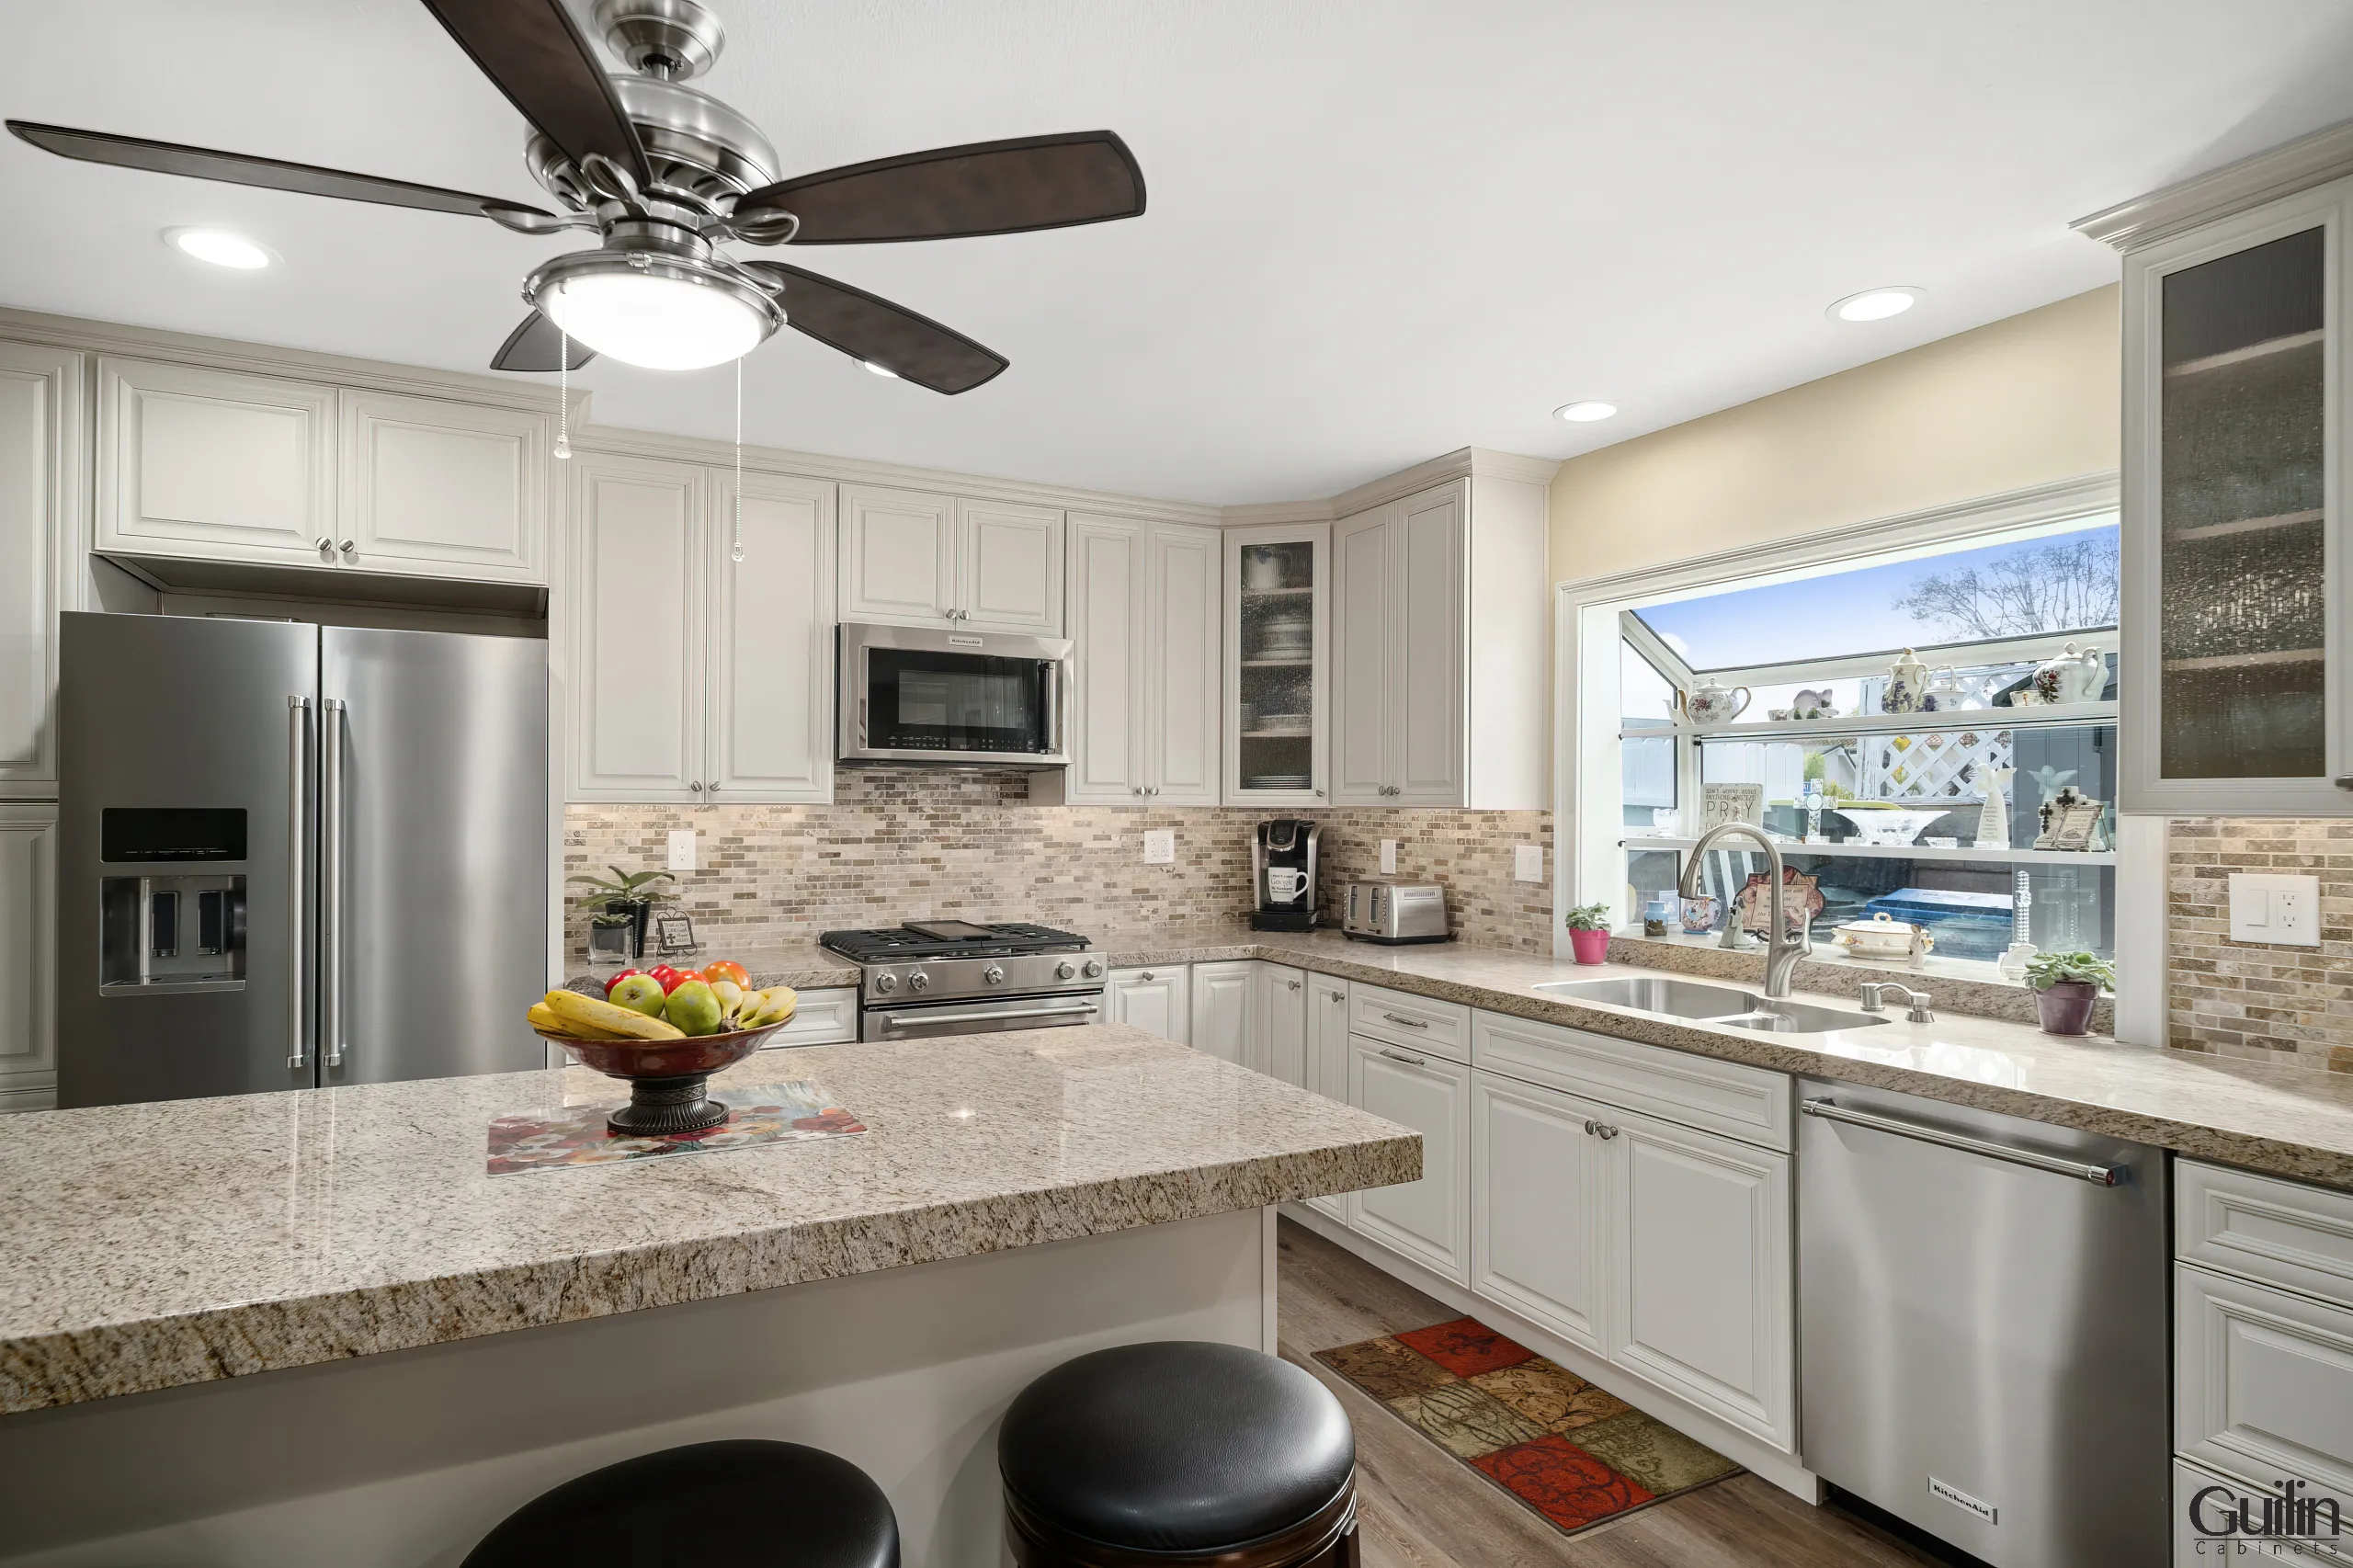 ey are a variety of colors and patterns to match any style decor of your kitchen